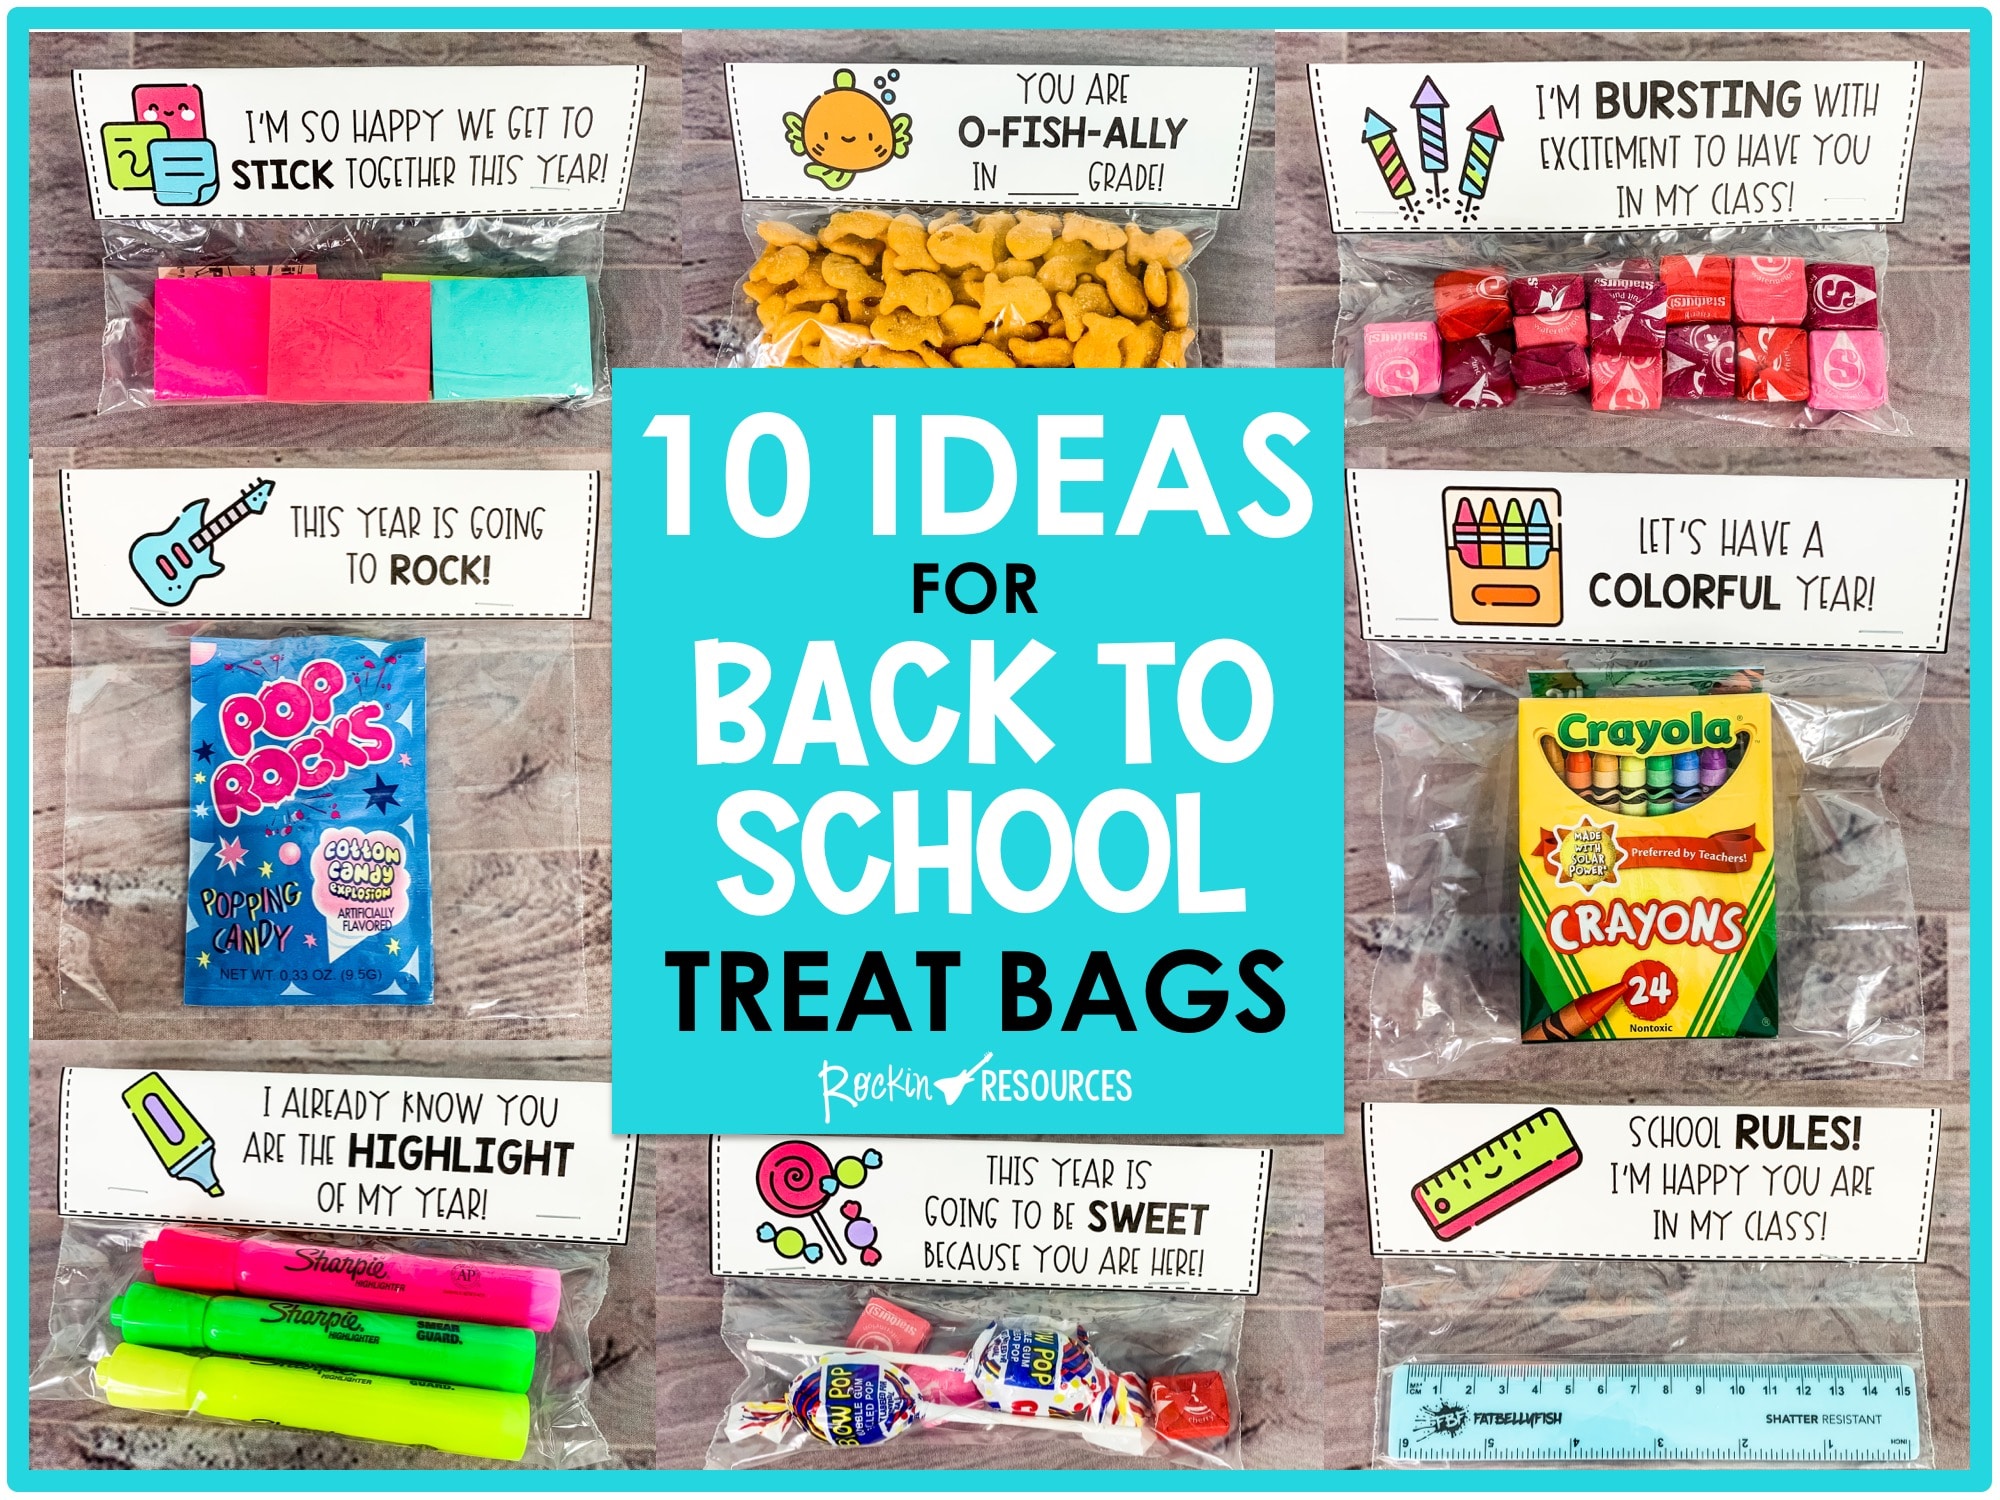 10 Ideas for Back-to-School Treat Bags (Non-food ideas included